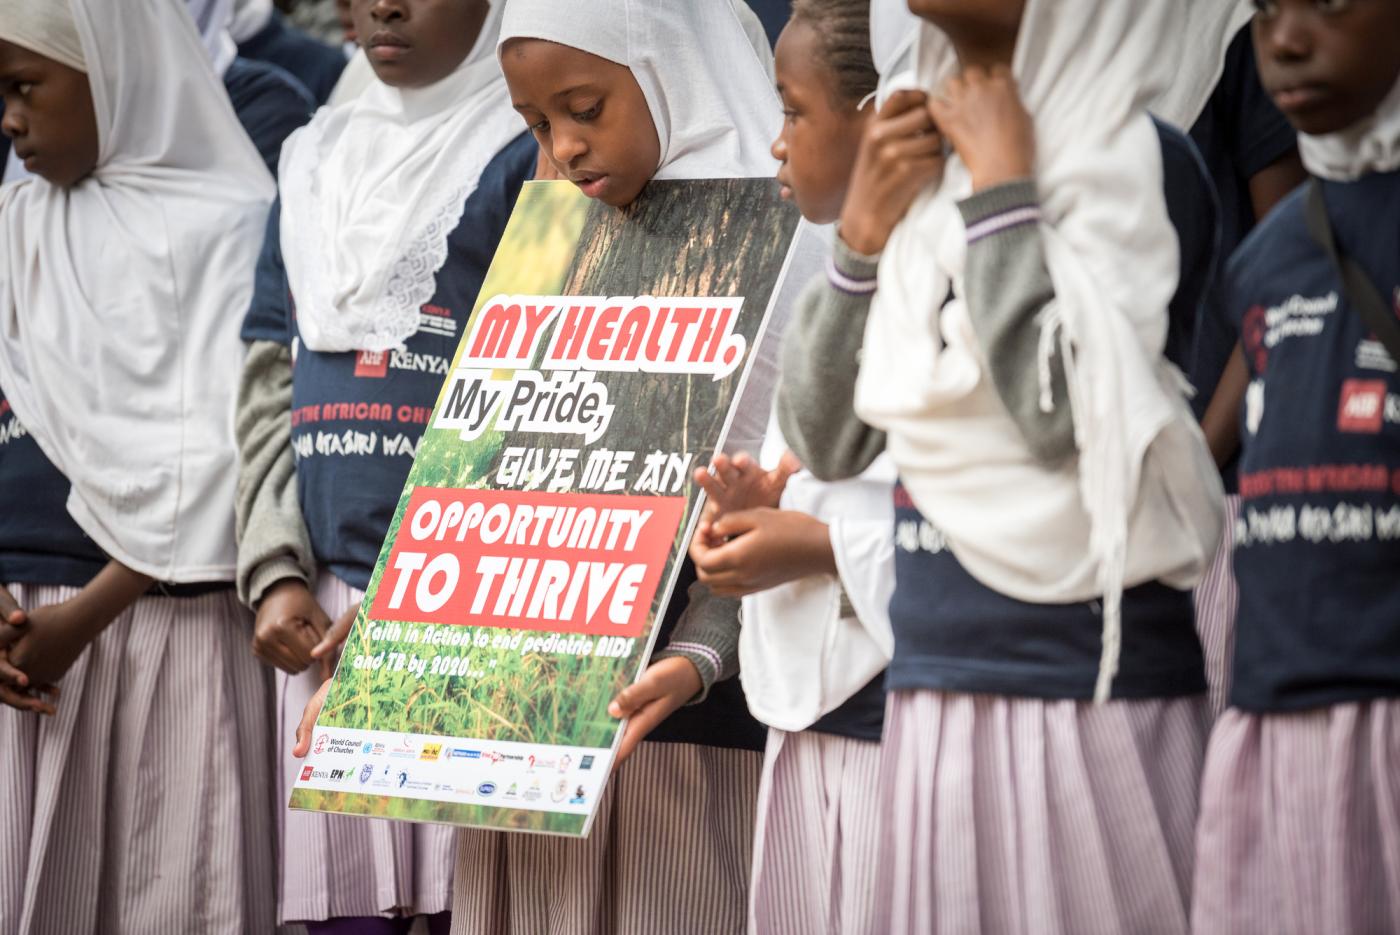 A group of African children holding a sign commemorating the Day of the African child in Kenya.